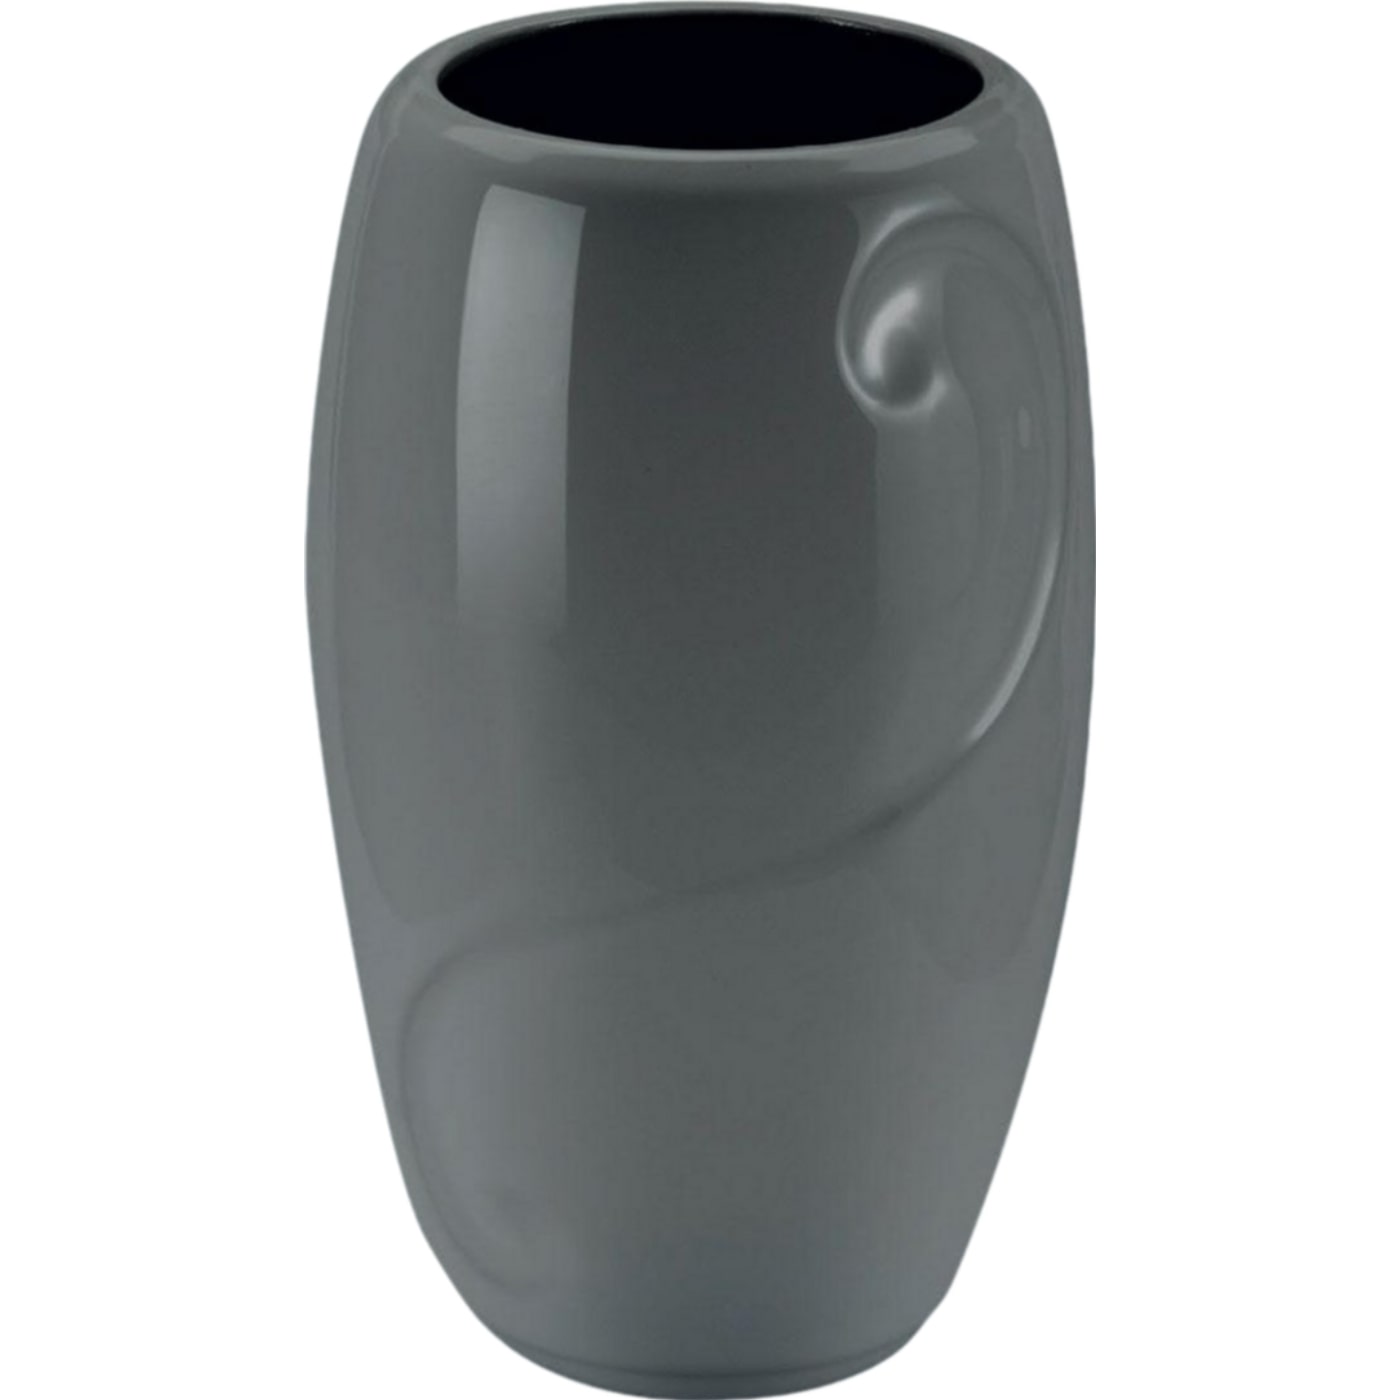 Grave vase Sharon gray 21x13cm - 8.3x5.1in In gray porcelain, ground attached SH124T/G